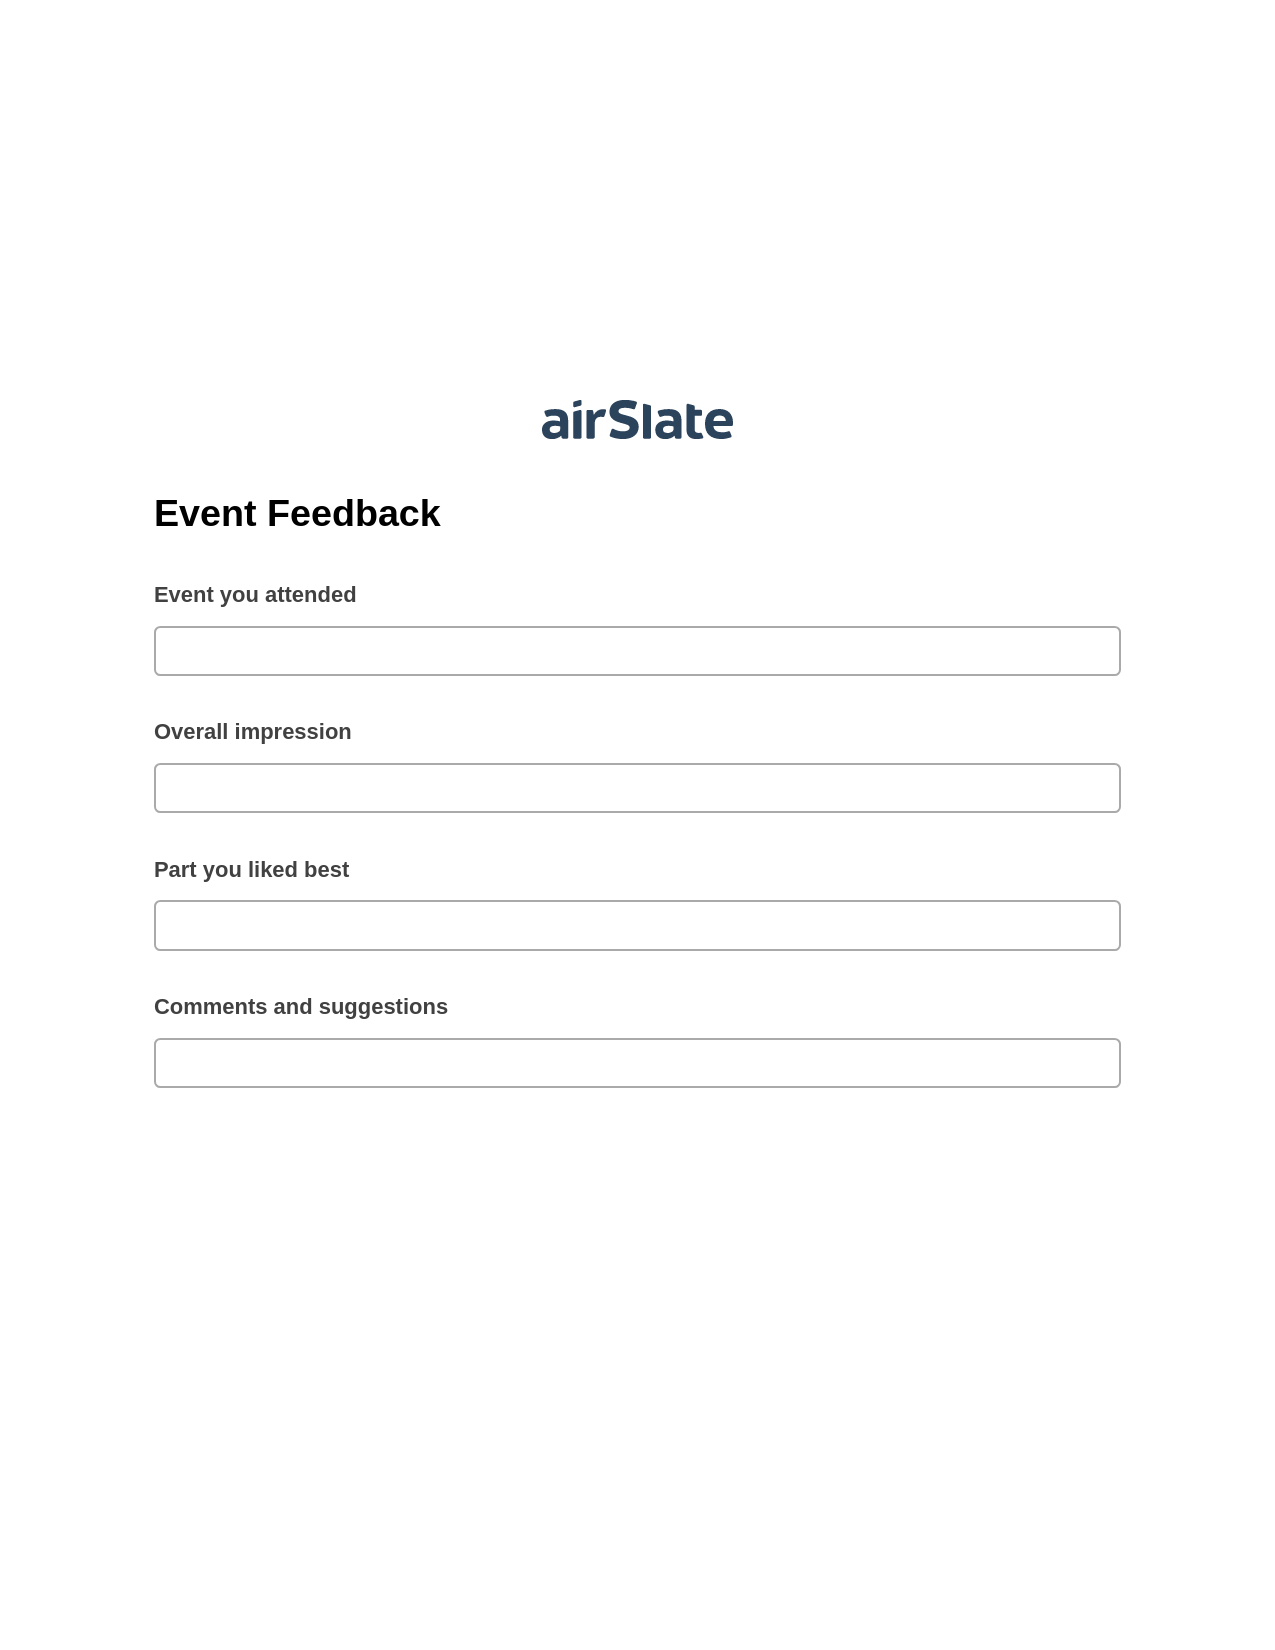 Event Feedback Pre-fill Slate from MS Dynamics 365 Records Bot, Create NetSuite Records Bot, Webhook Postfinish Bot